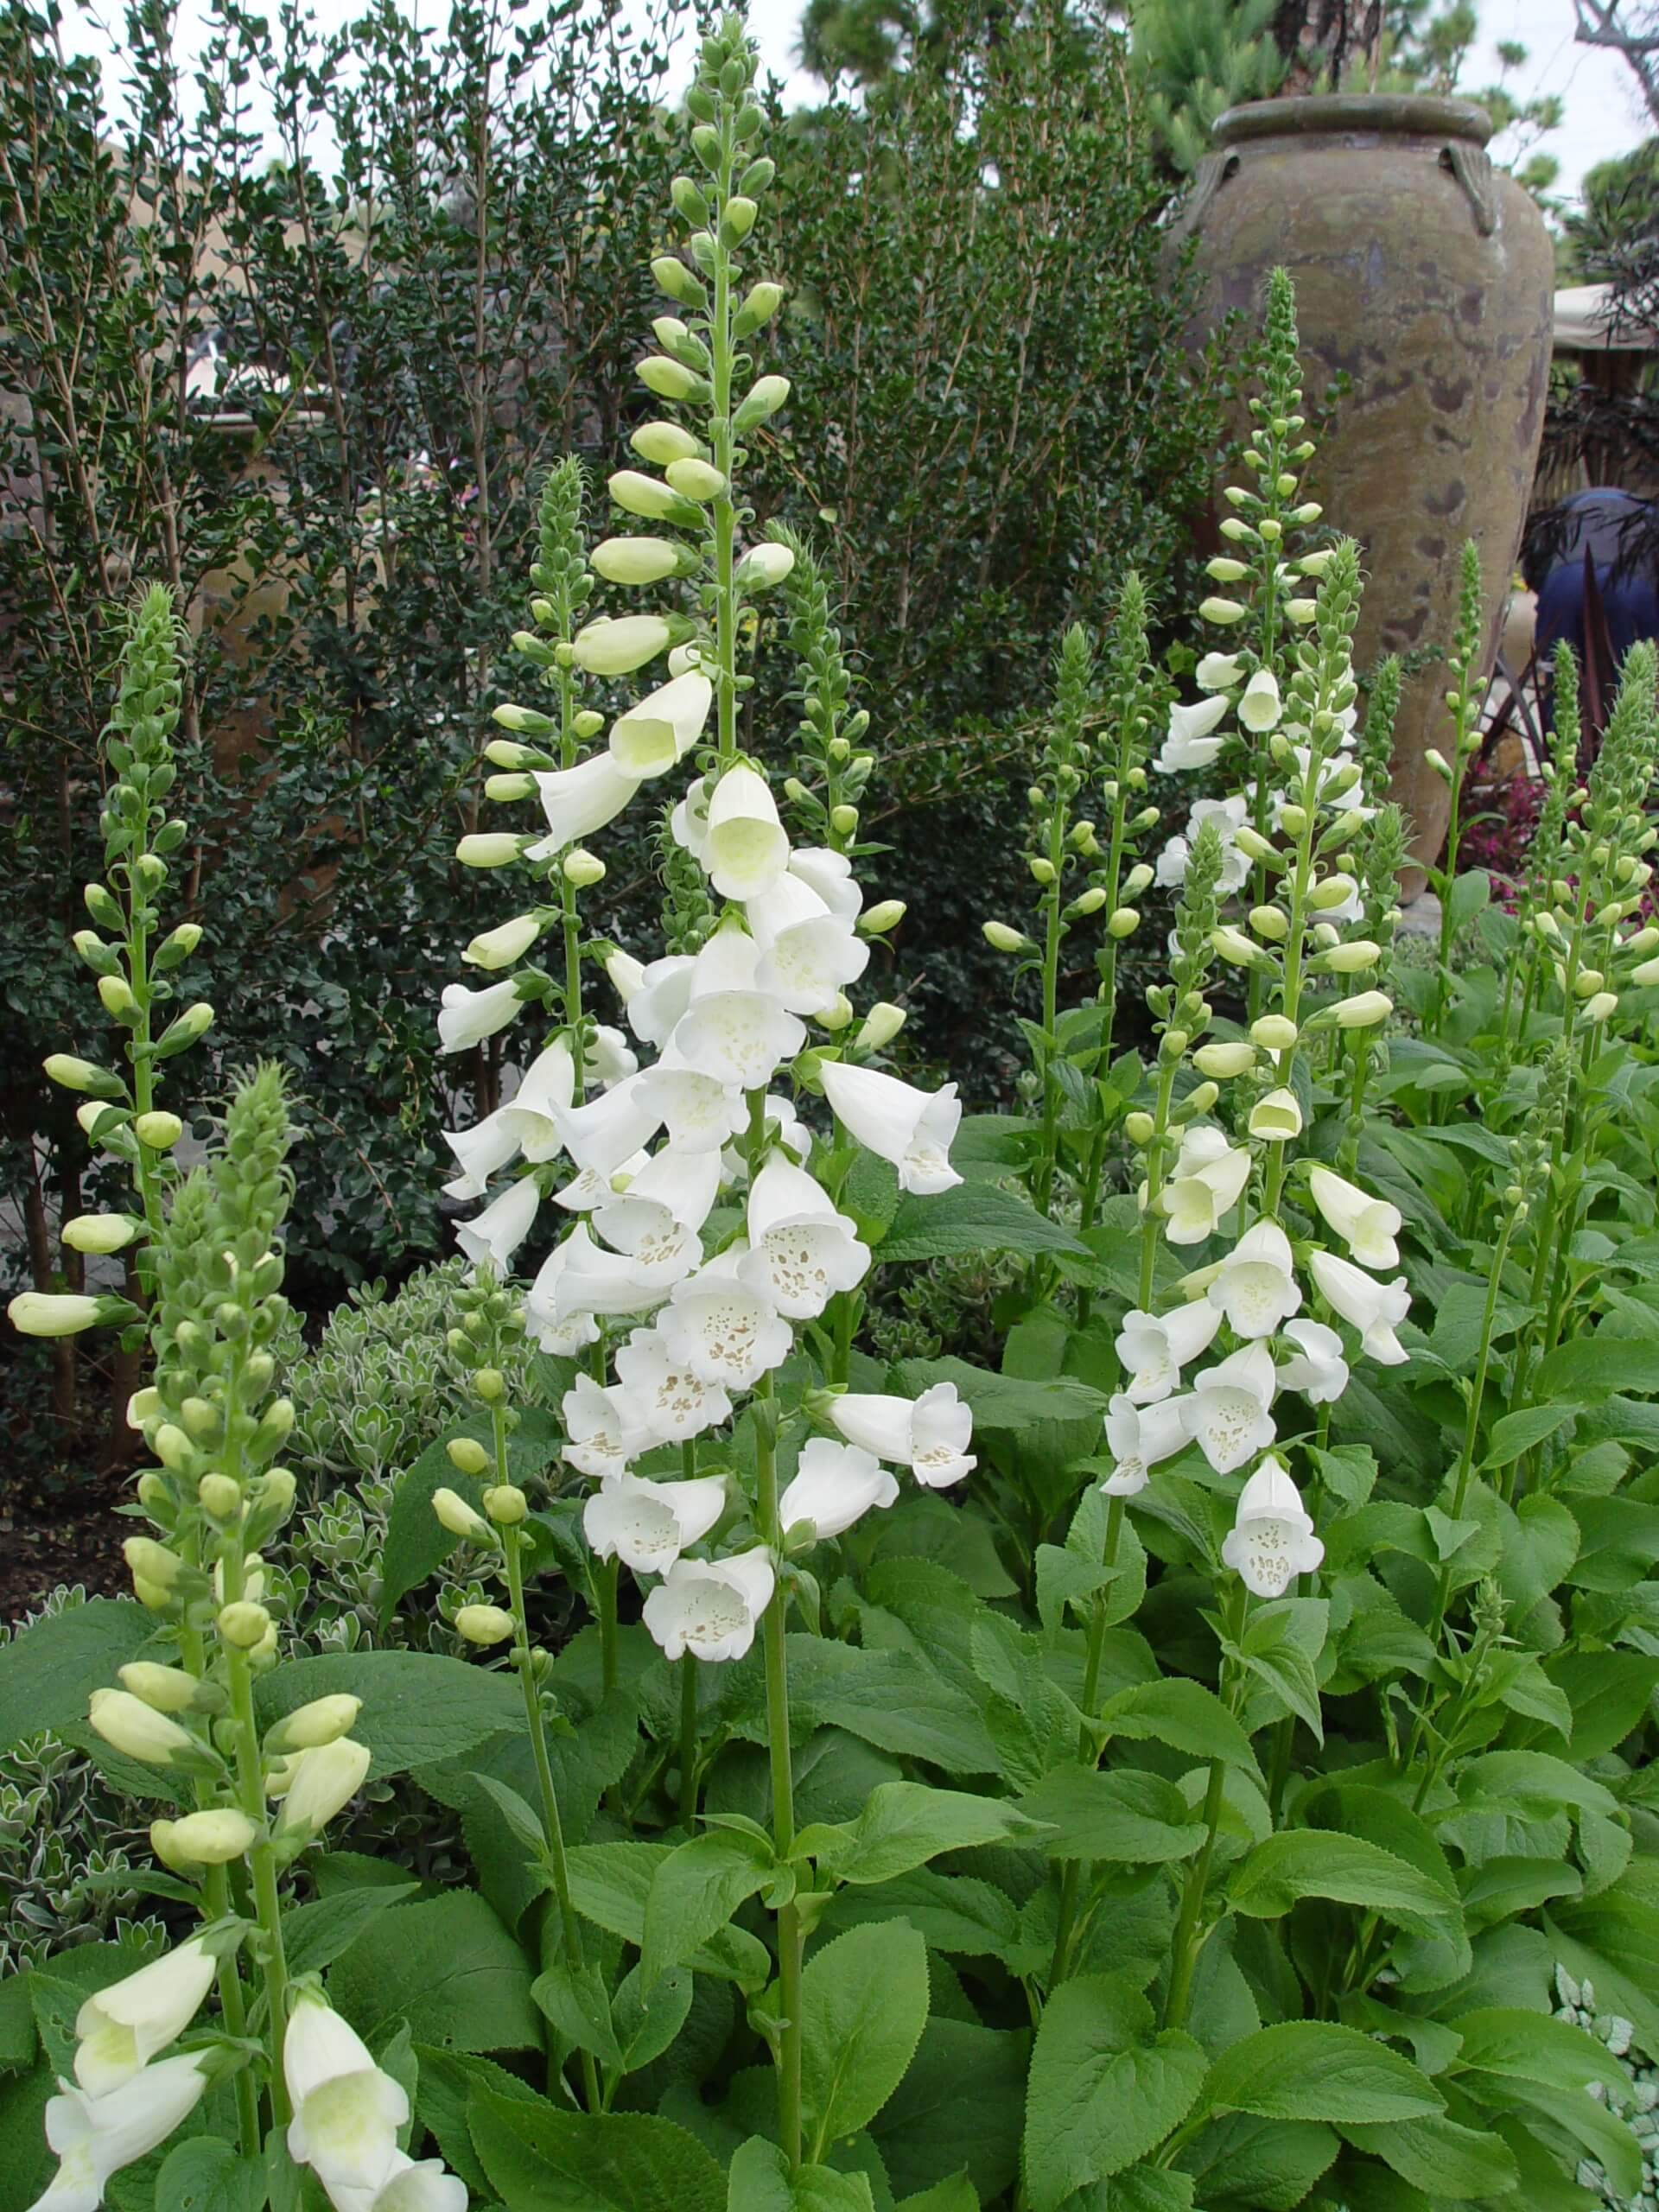 The classic purple foxglove attract bumblebees more efficiently than white-flowered variants.